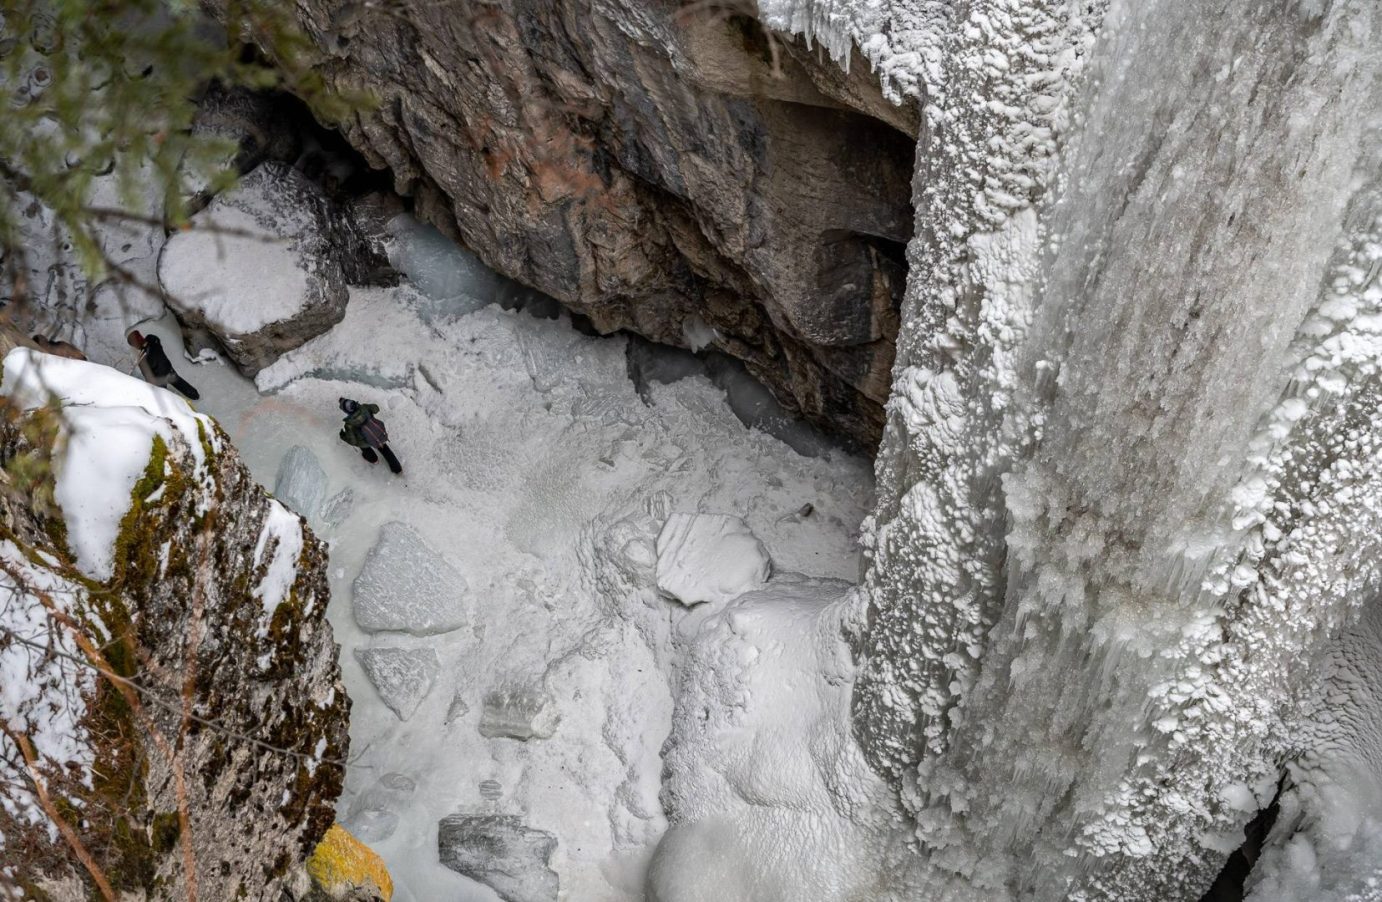 Looking down on people doing the Maligne Canyon Ice Walk